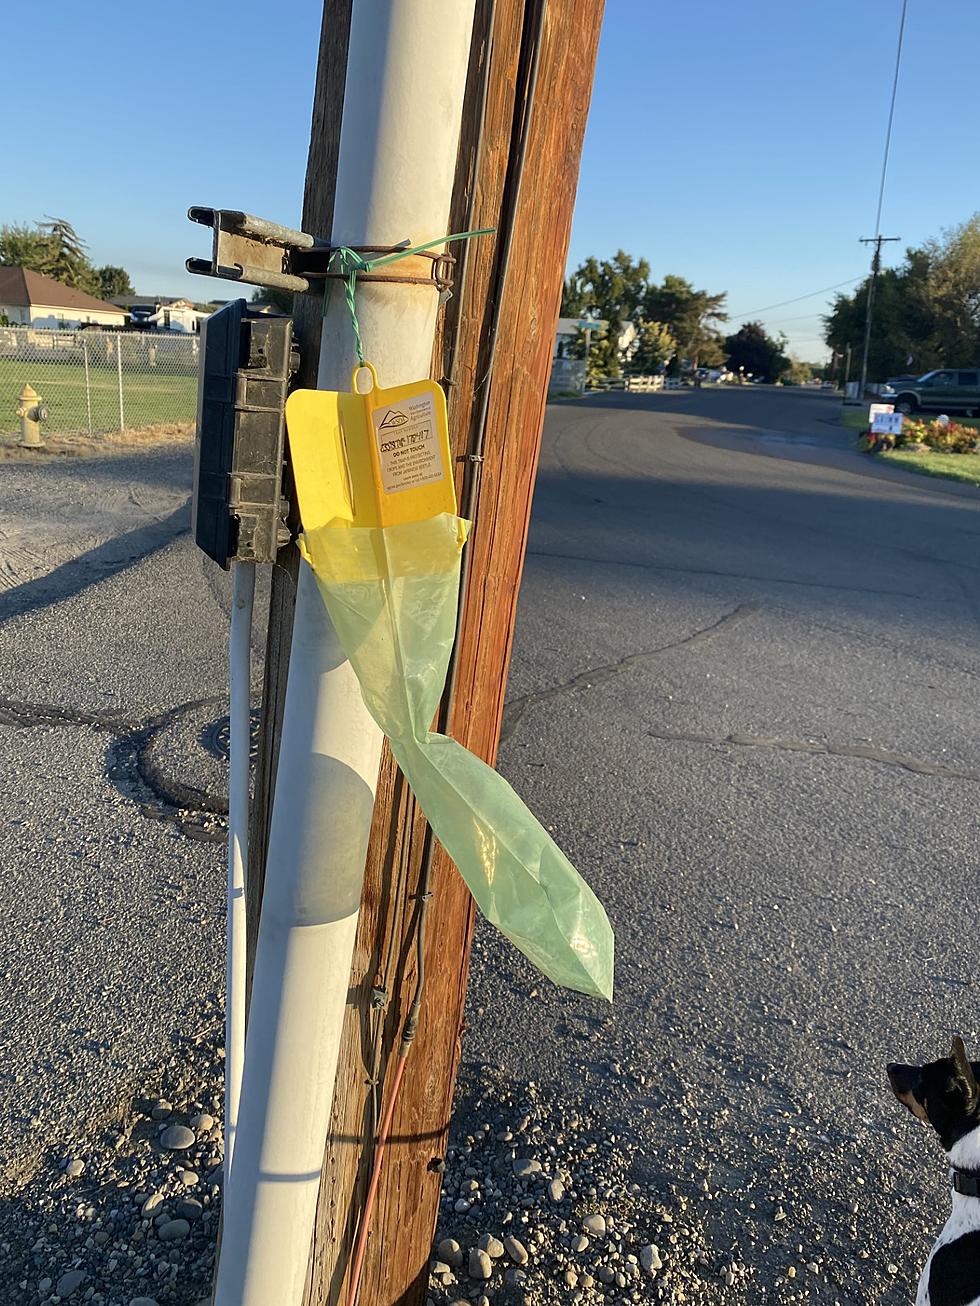 DON&#8217;T TOUCH These Green Bags on Utility Poles in Tri-Cities